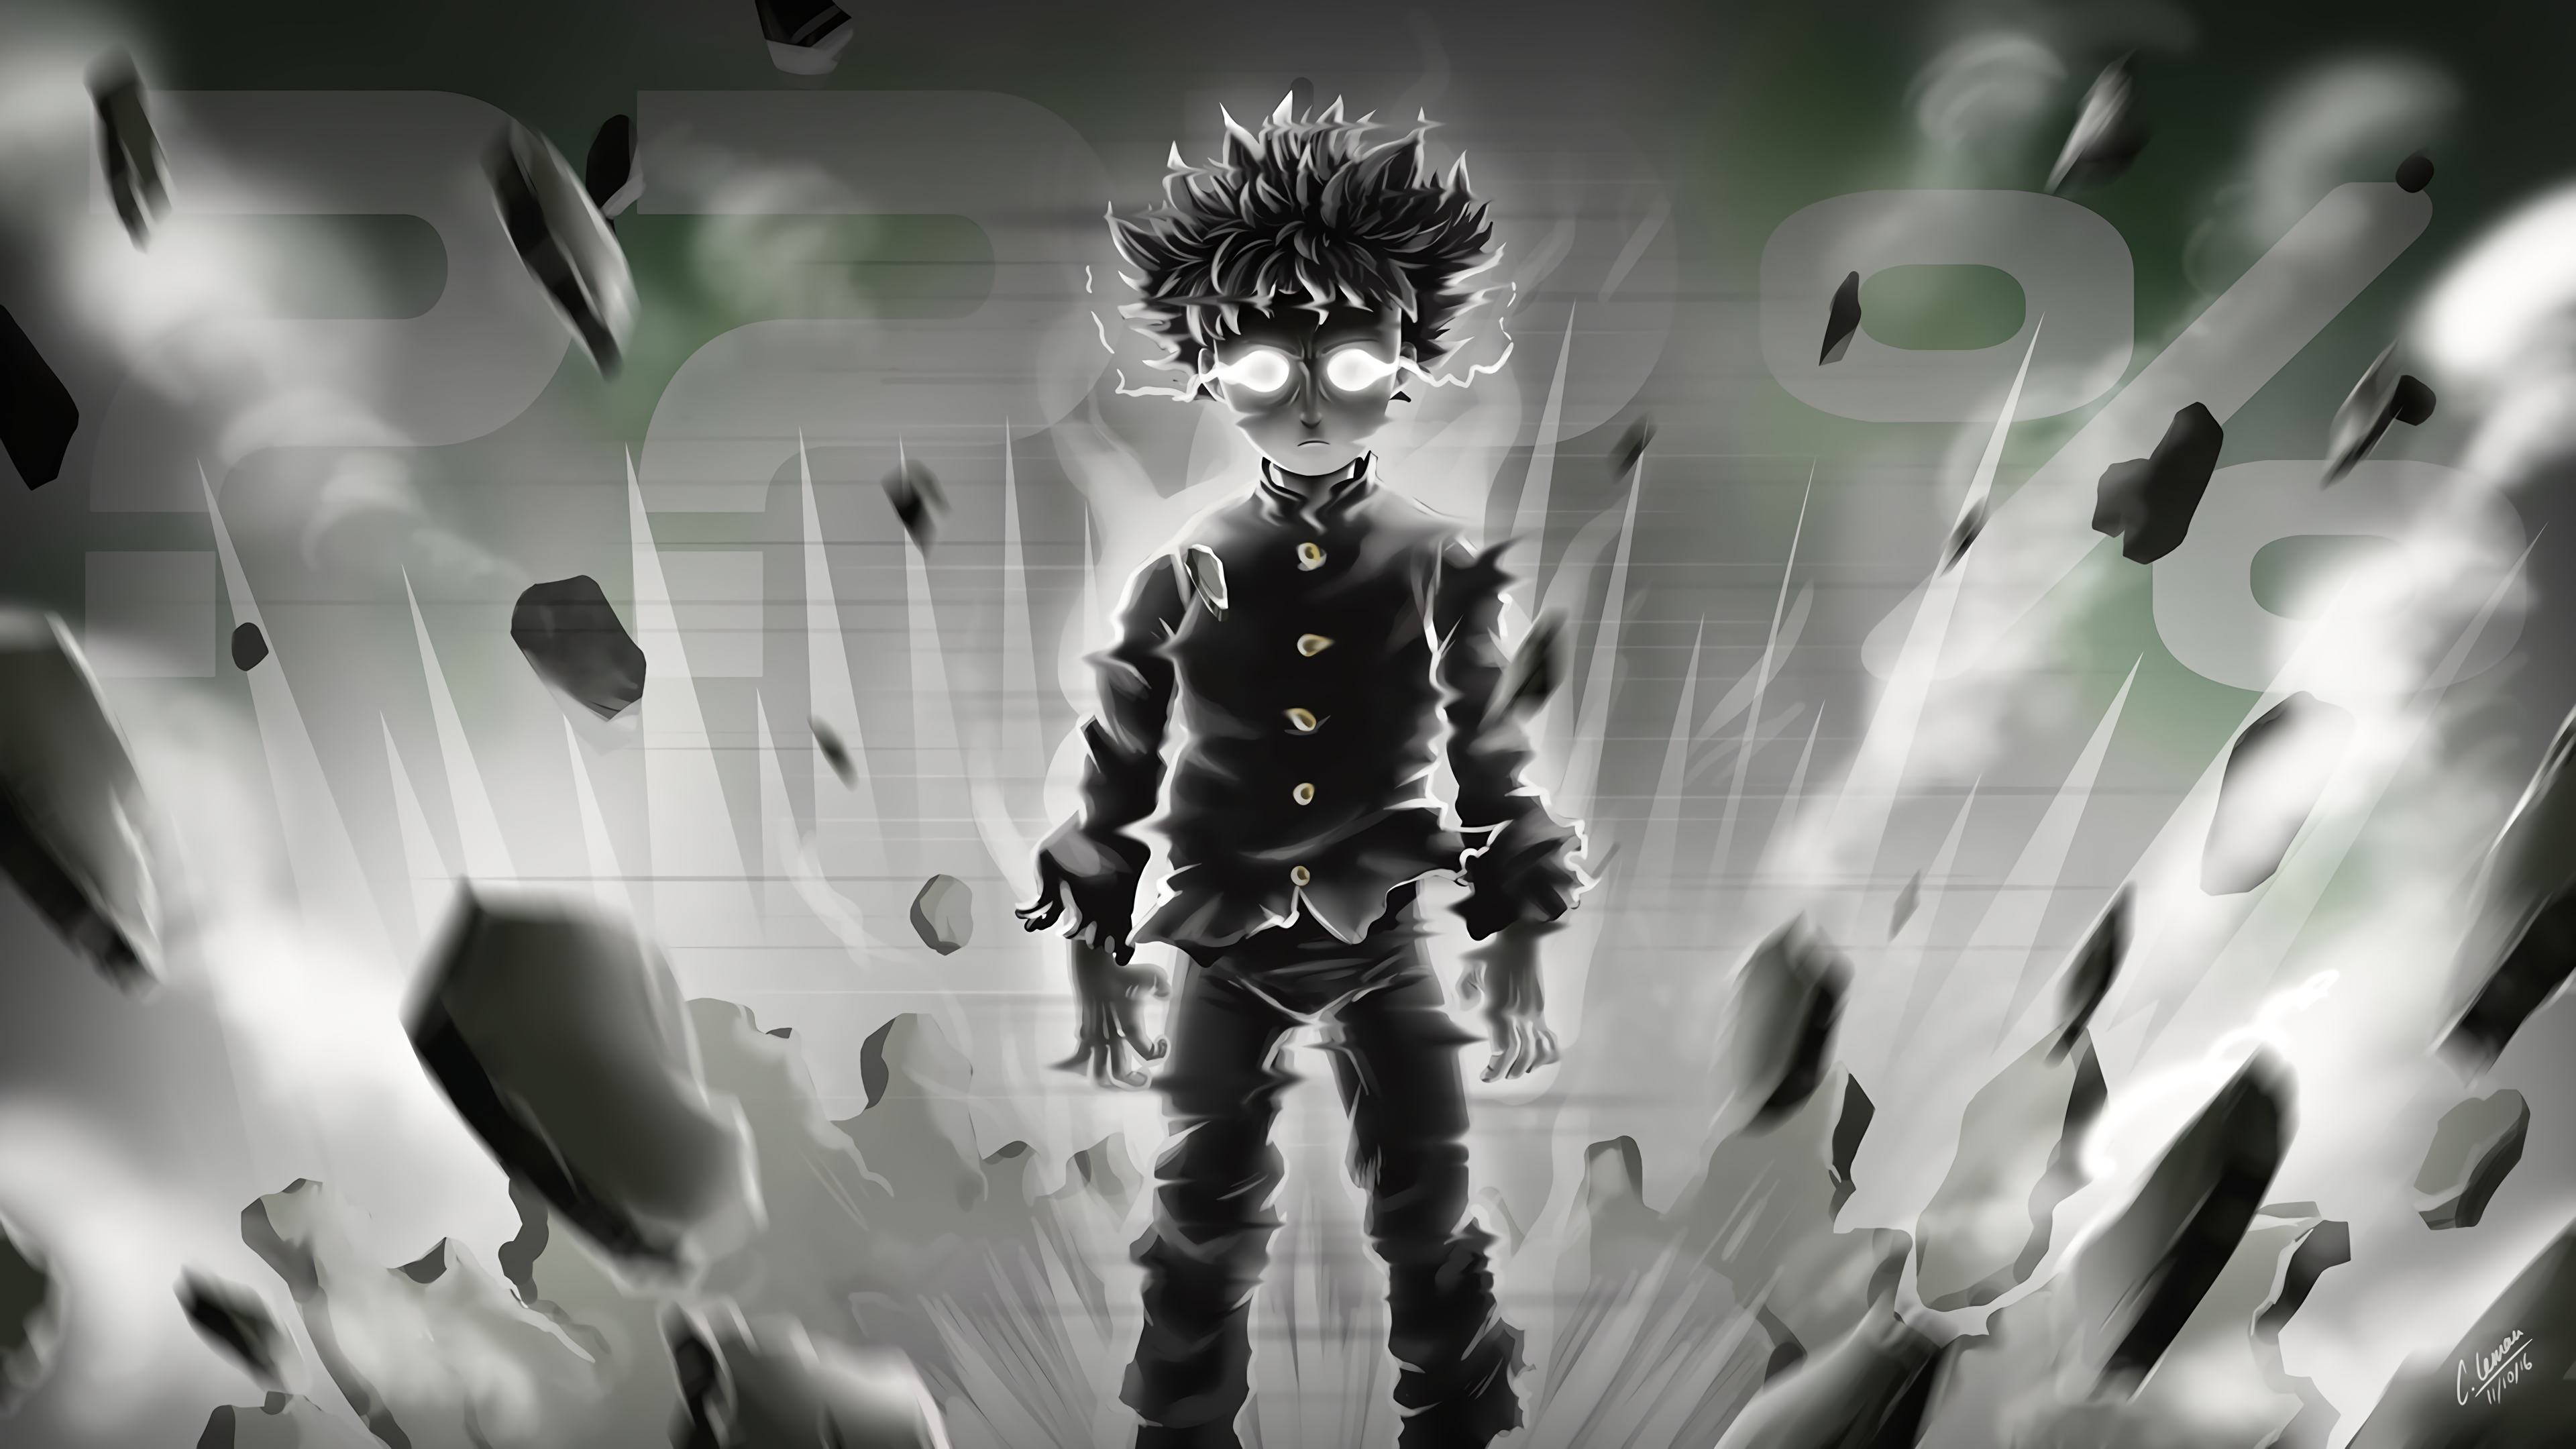 160+ Anime Mob Psycho 100 HD Wallpapers and Backgrounds